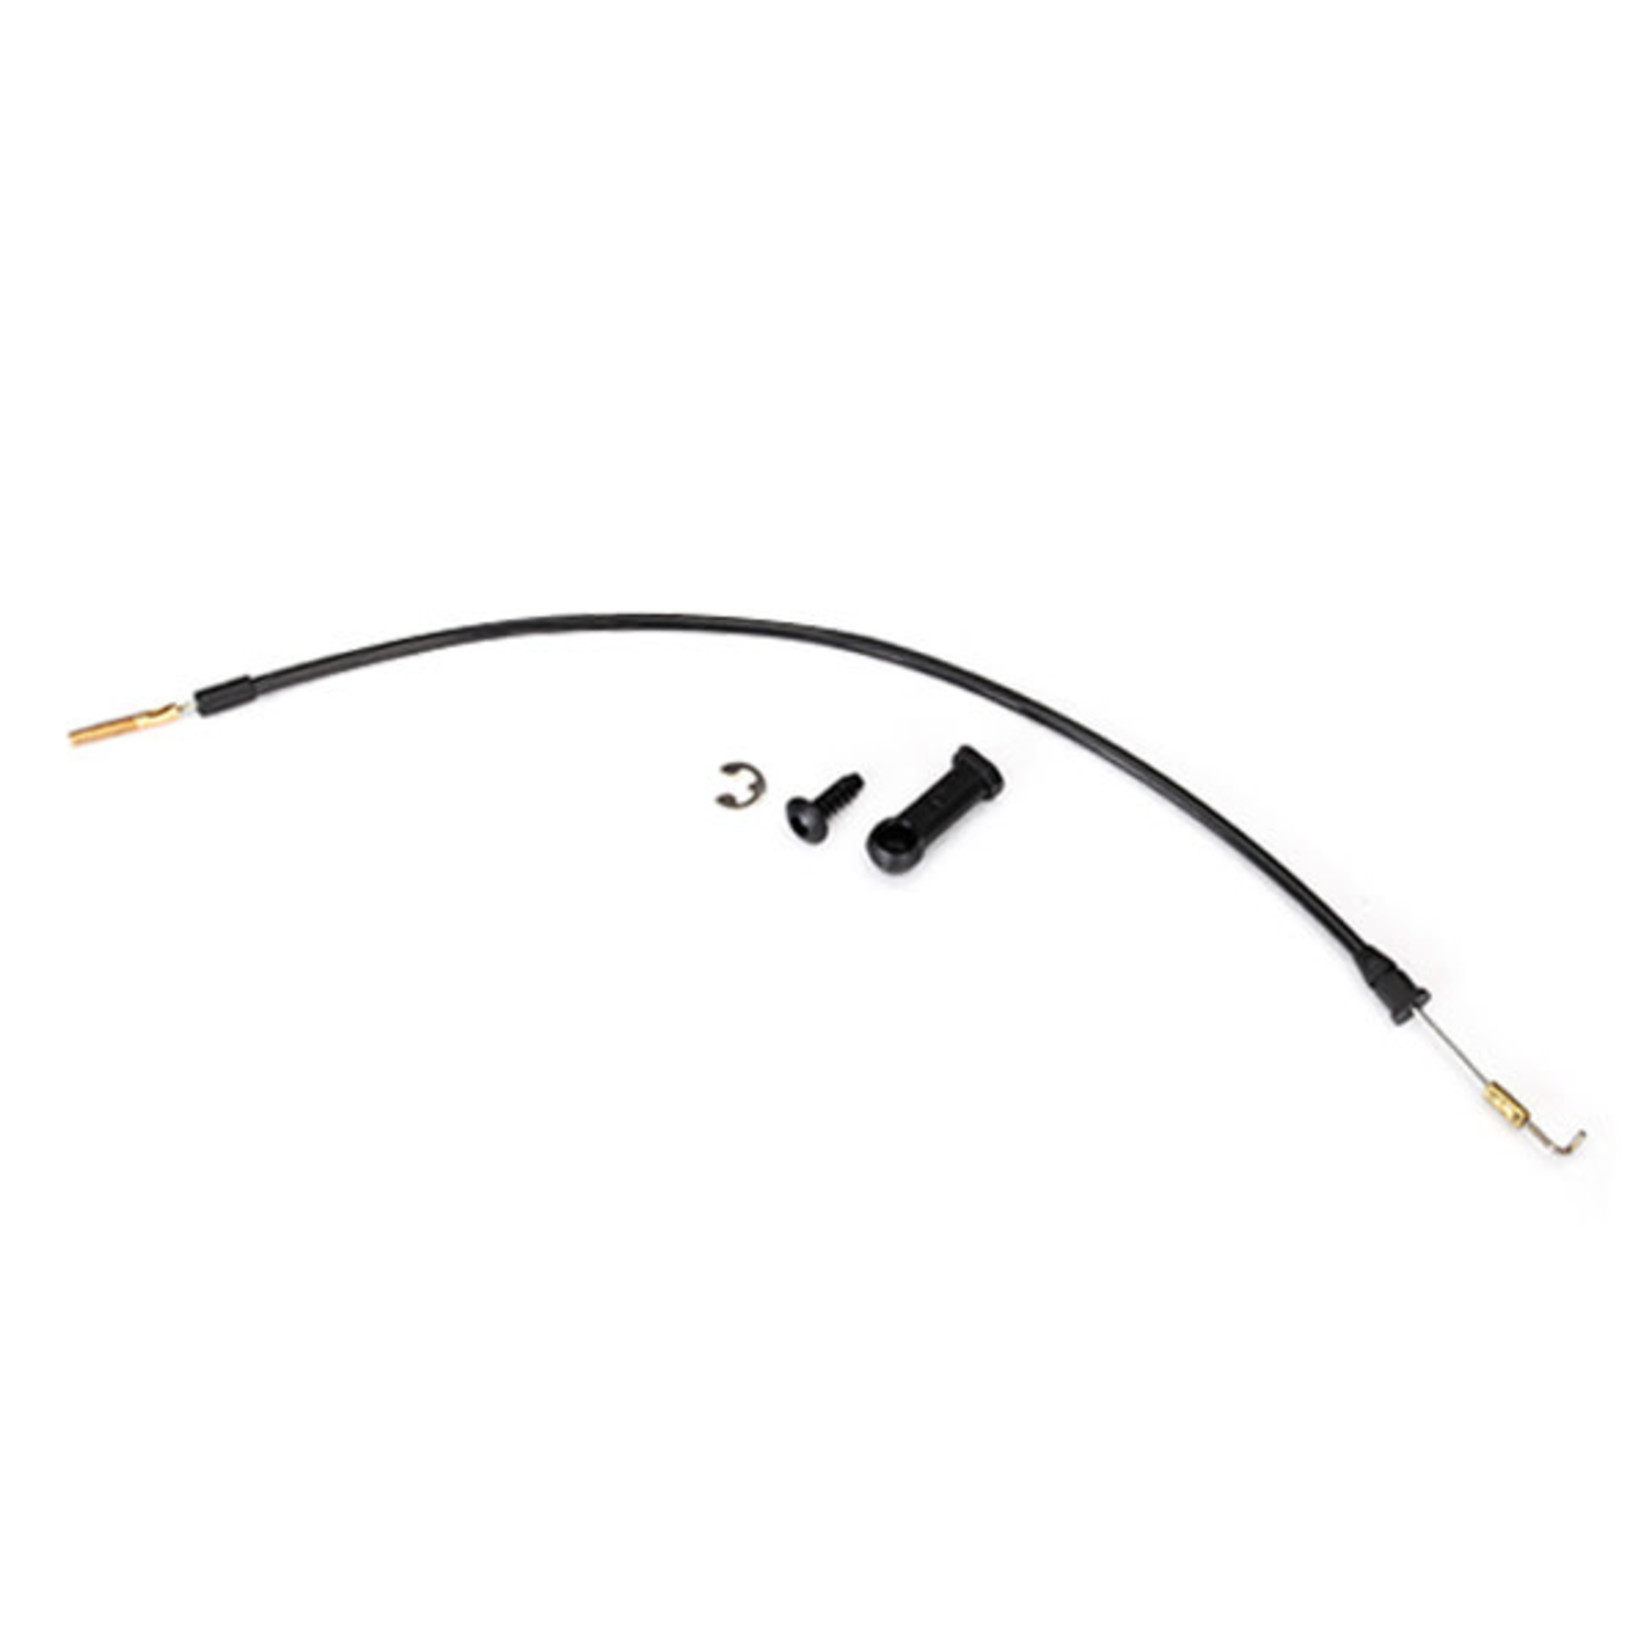 Traxxas TRA8283 Traxxas Cable T-Lock (Front)